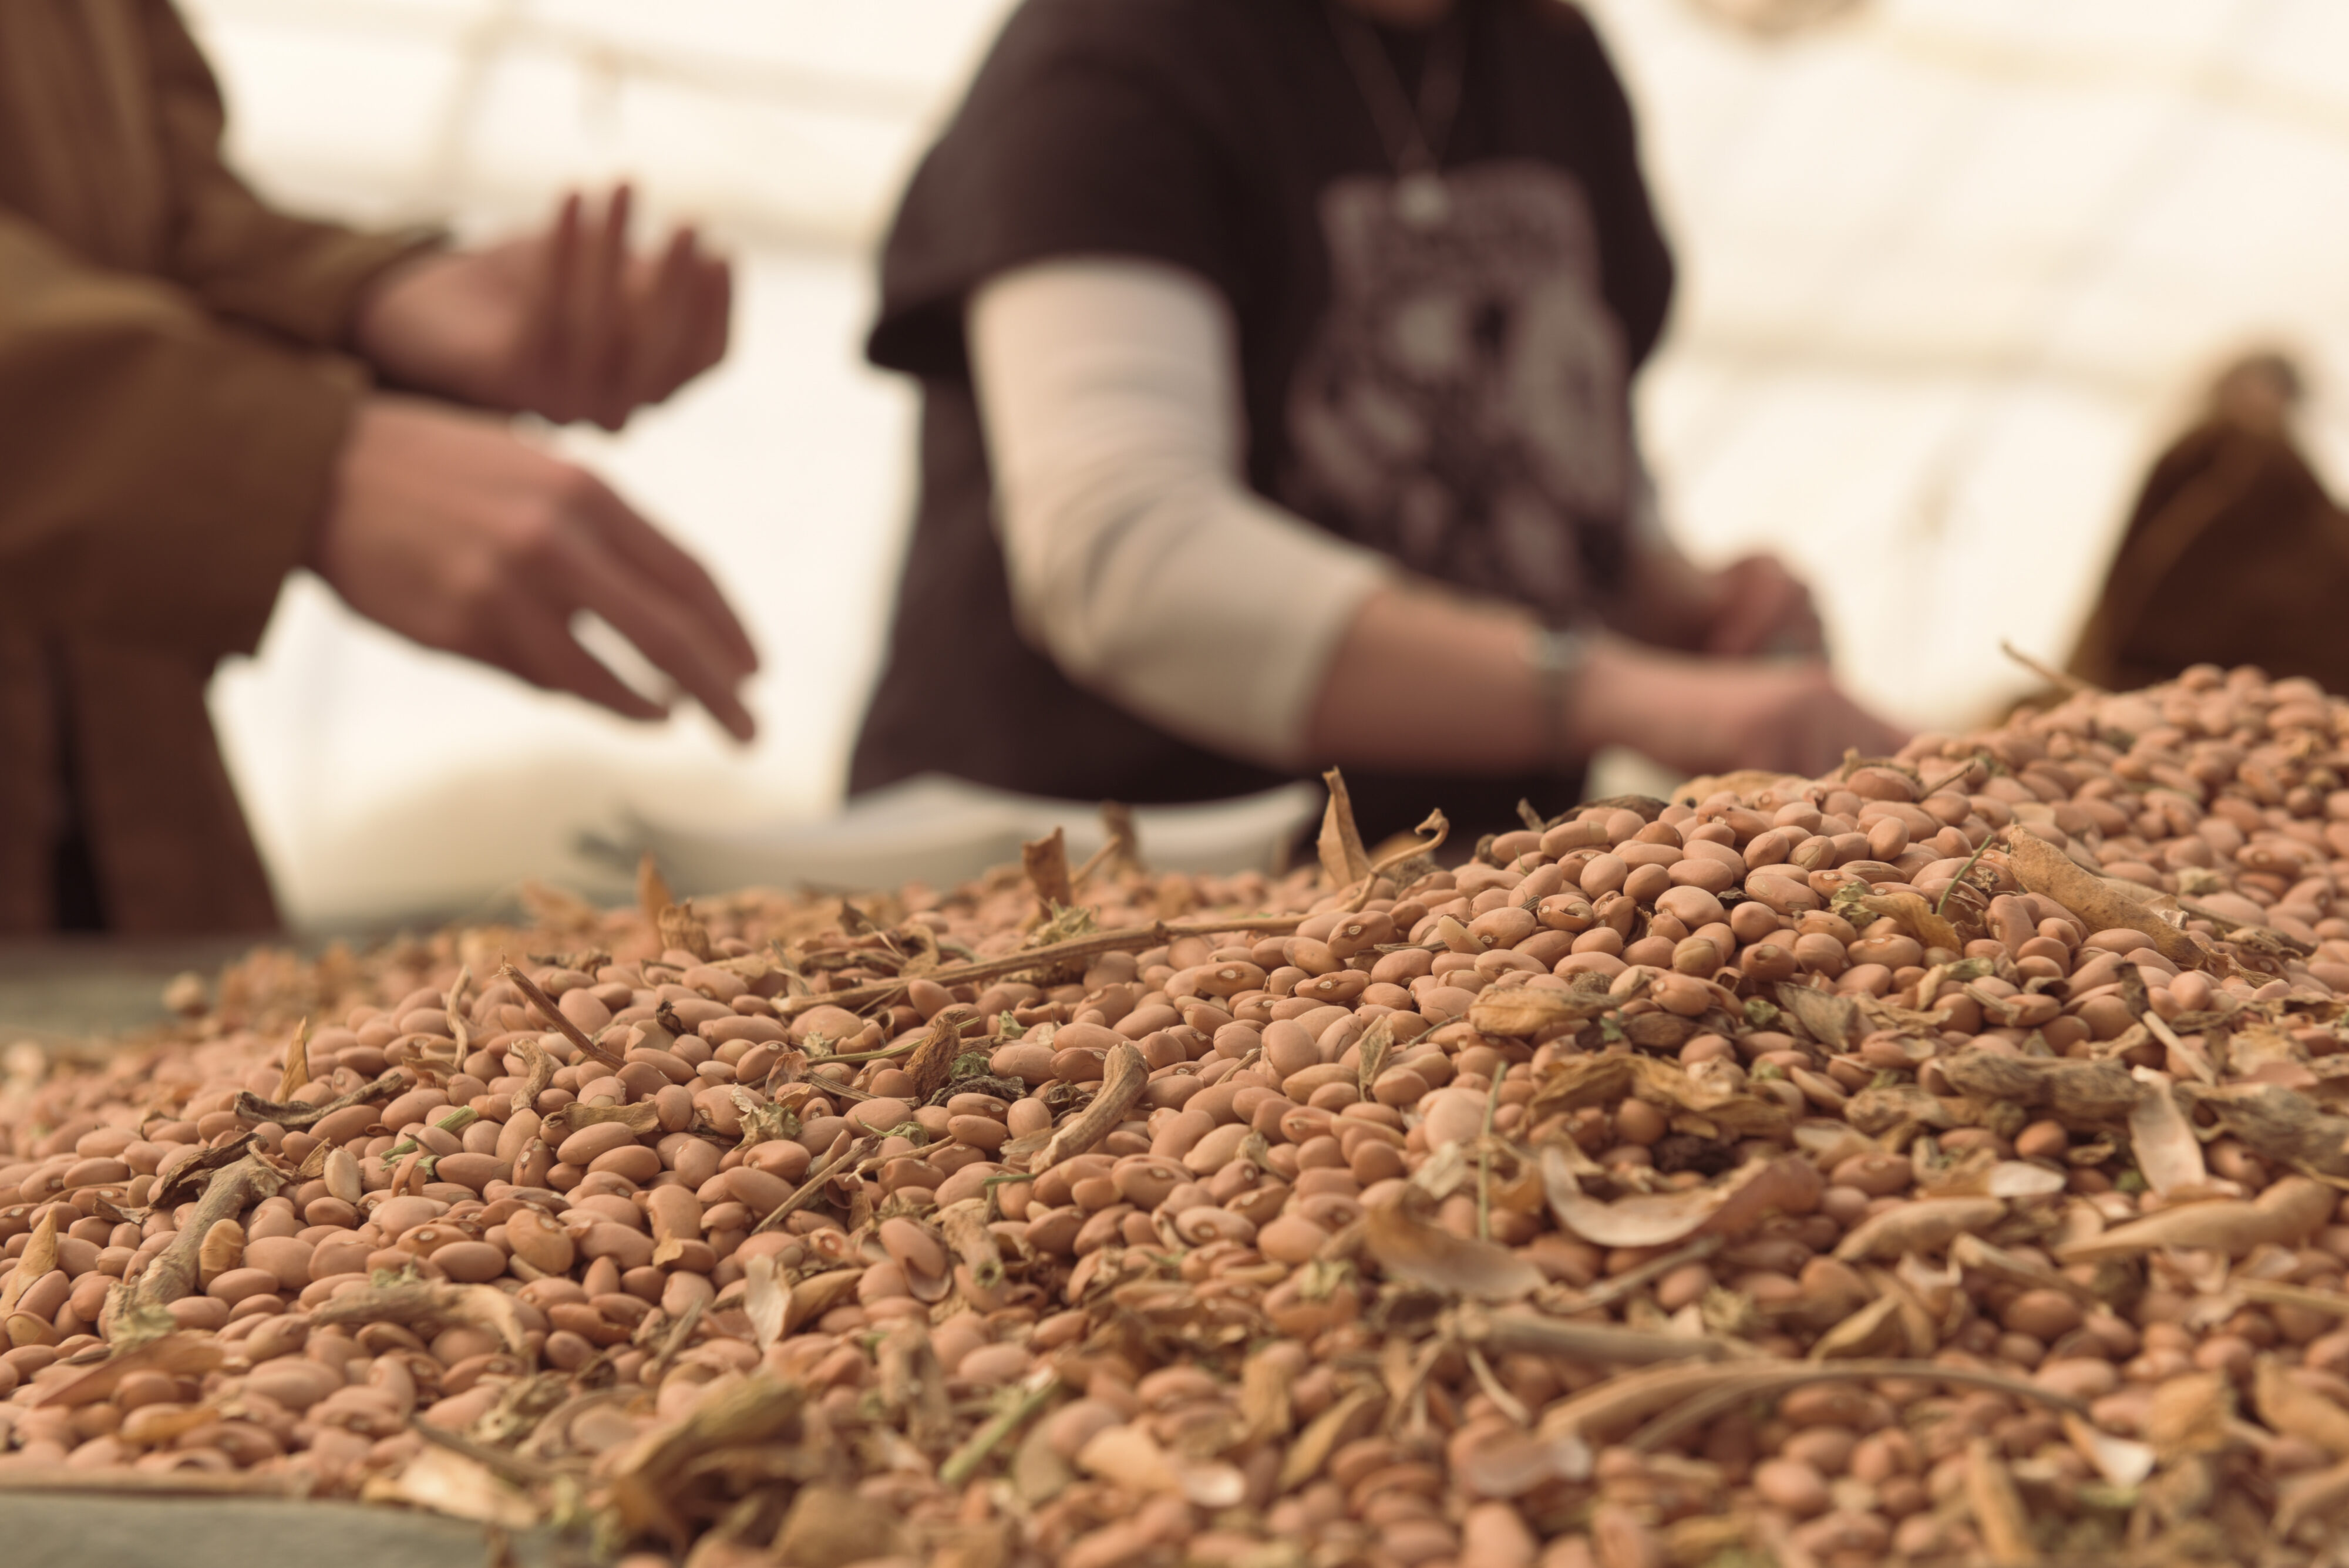 Workers sort out damaged seeds from last year's bean crop to be planted this season.